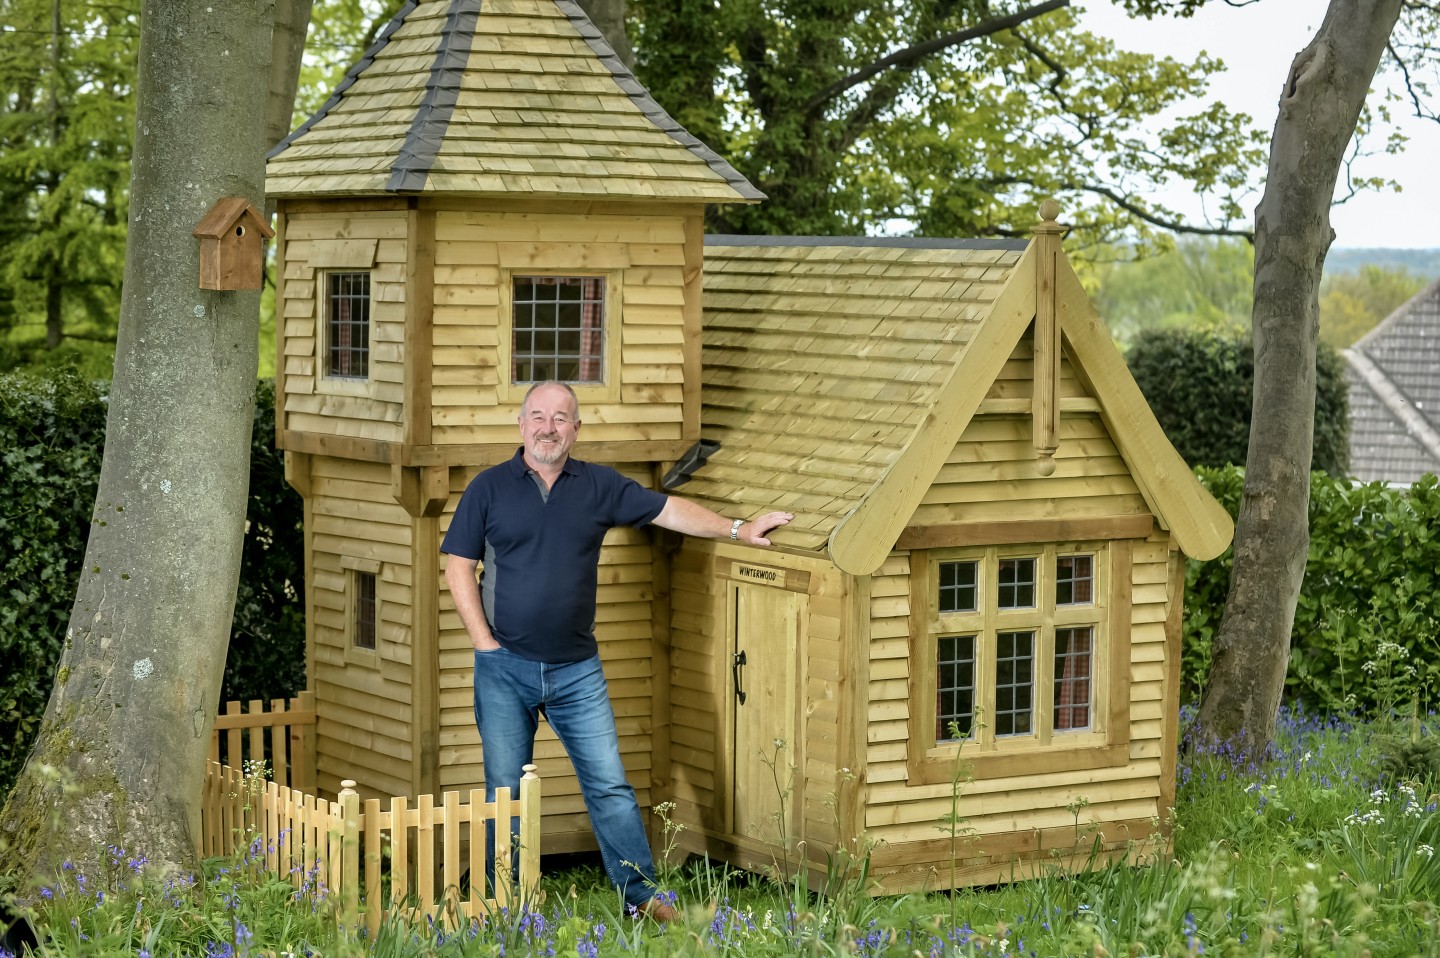 Winterwood, by Mark Campbell, is a cabin styled as a fairytale castle built during the 2020 COVID-19 lockdown in England to inspire his grandchildren. The project is a finalist in the Lockdown category